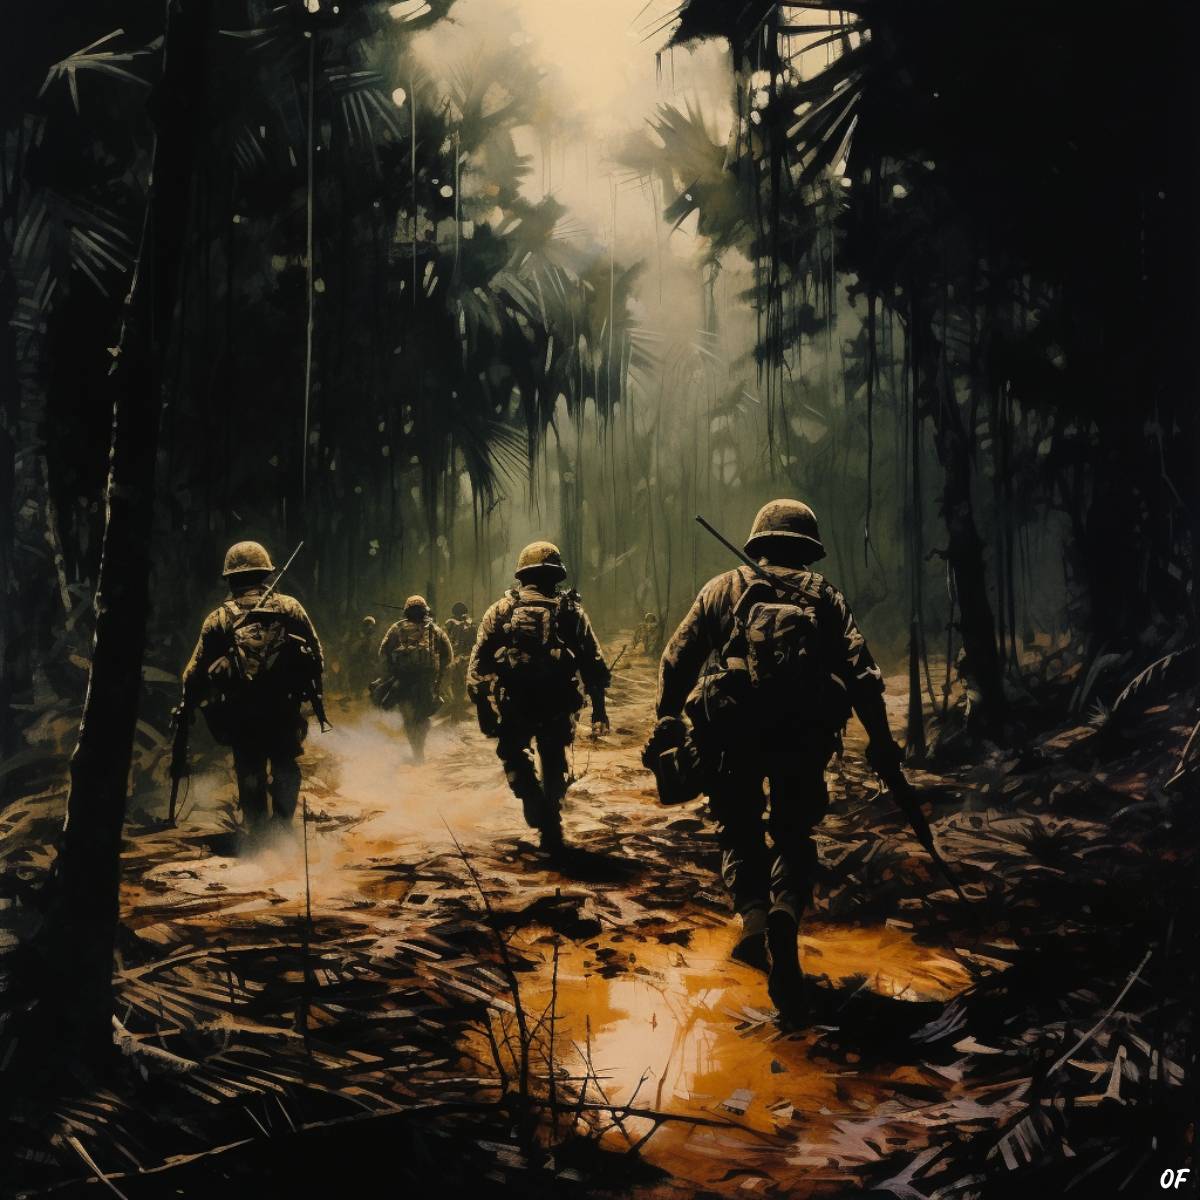 A group of American GIs on night patrol in the Vietnamese jungle.